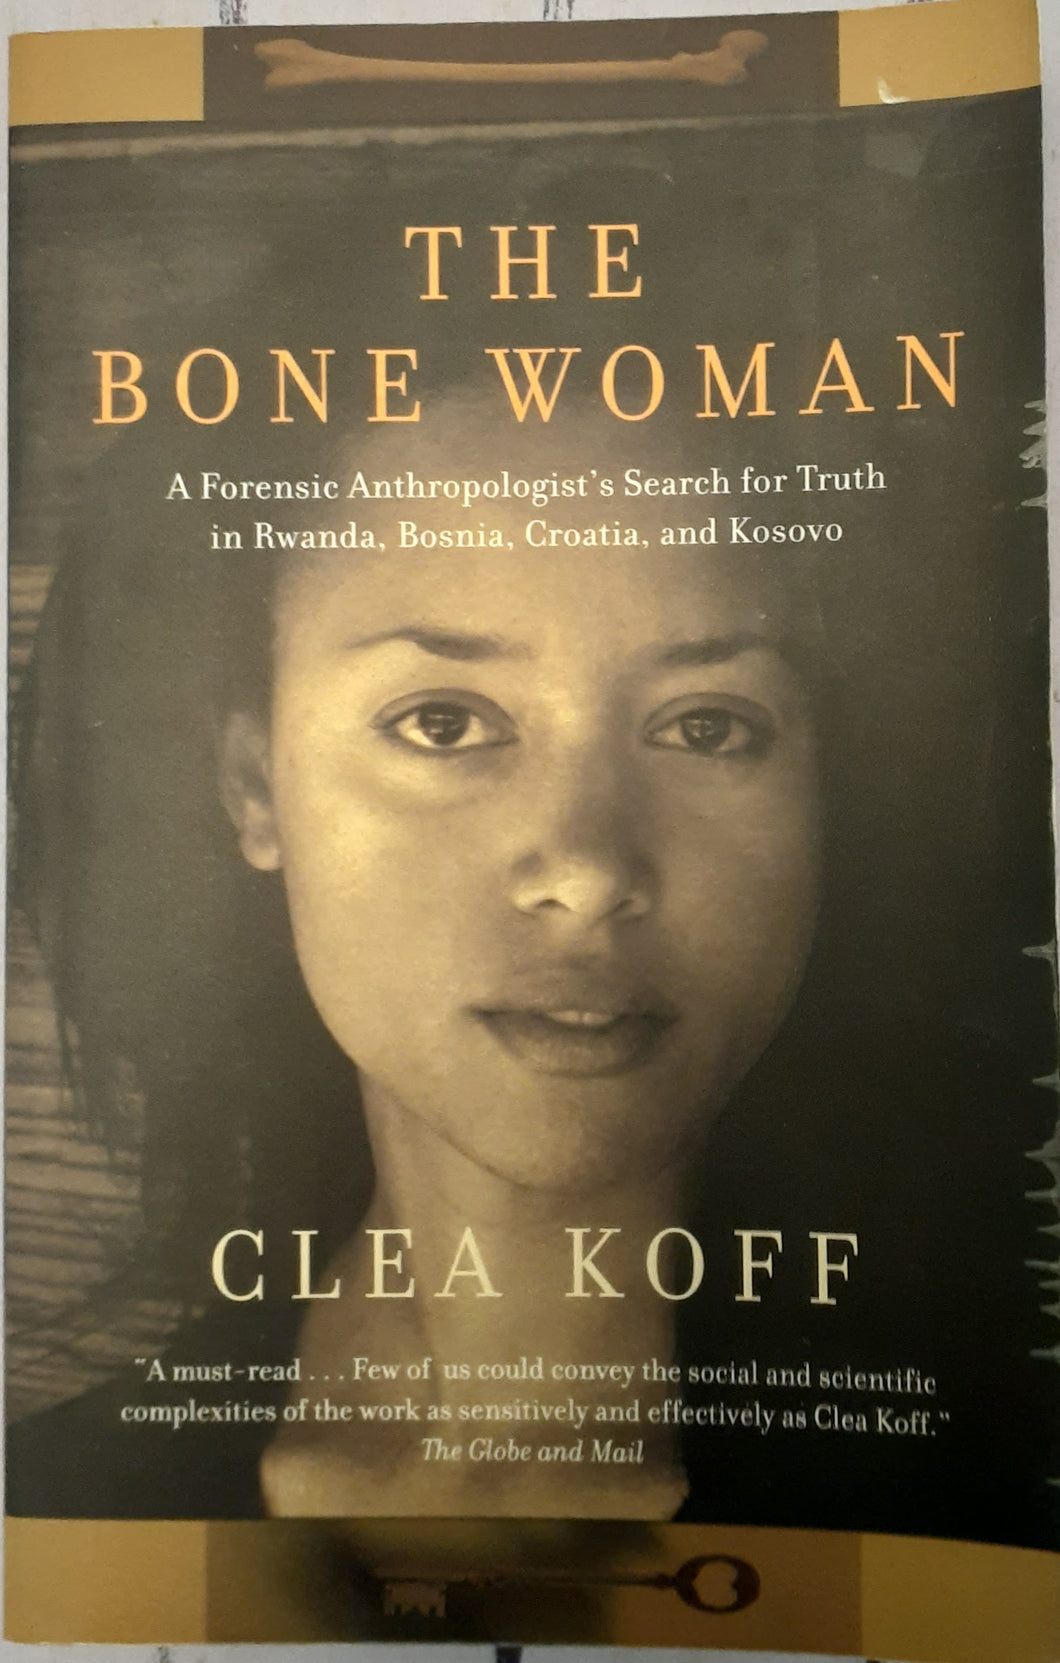 The Bone Woman: A Forensic Anthropologist's Search for Truth in Rwanda, Bosnia, and Kosovo